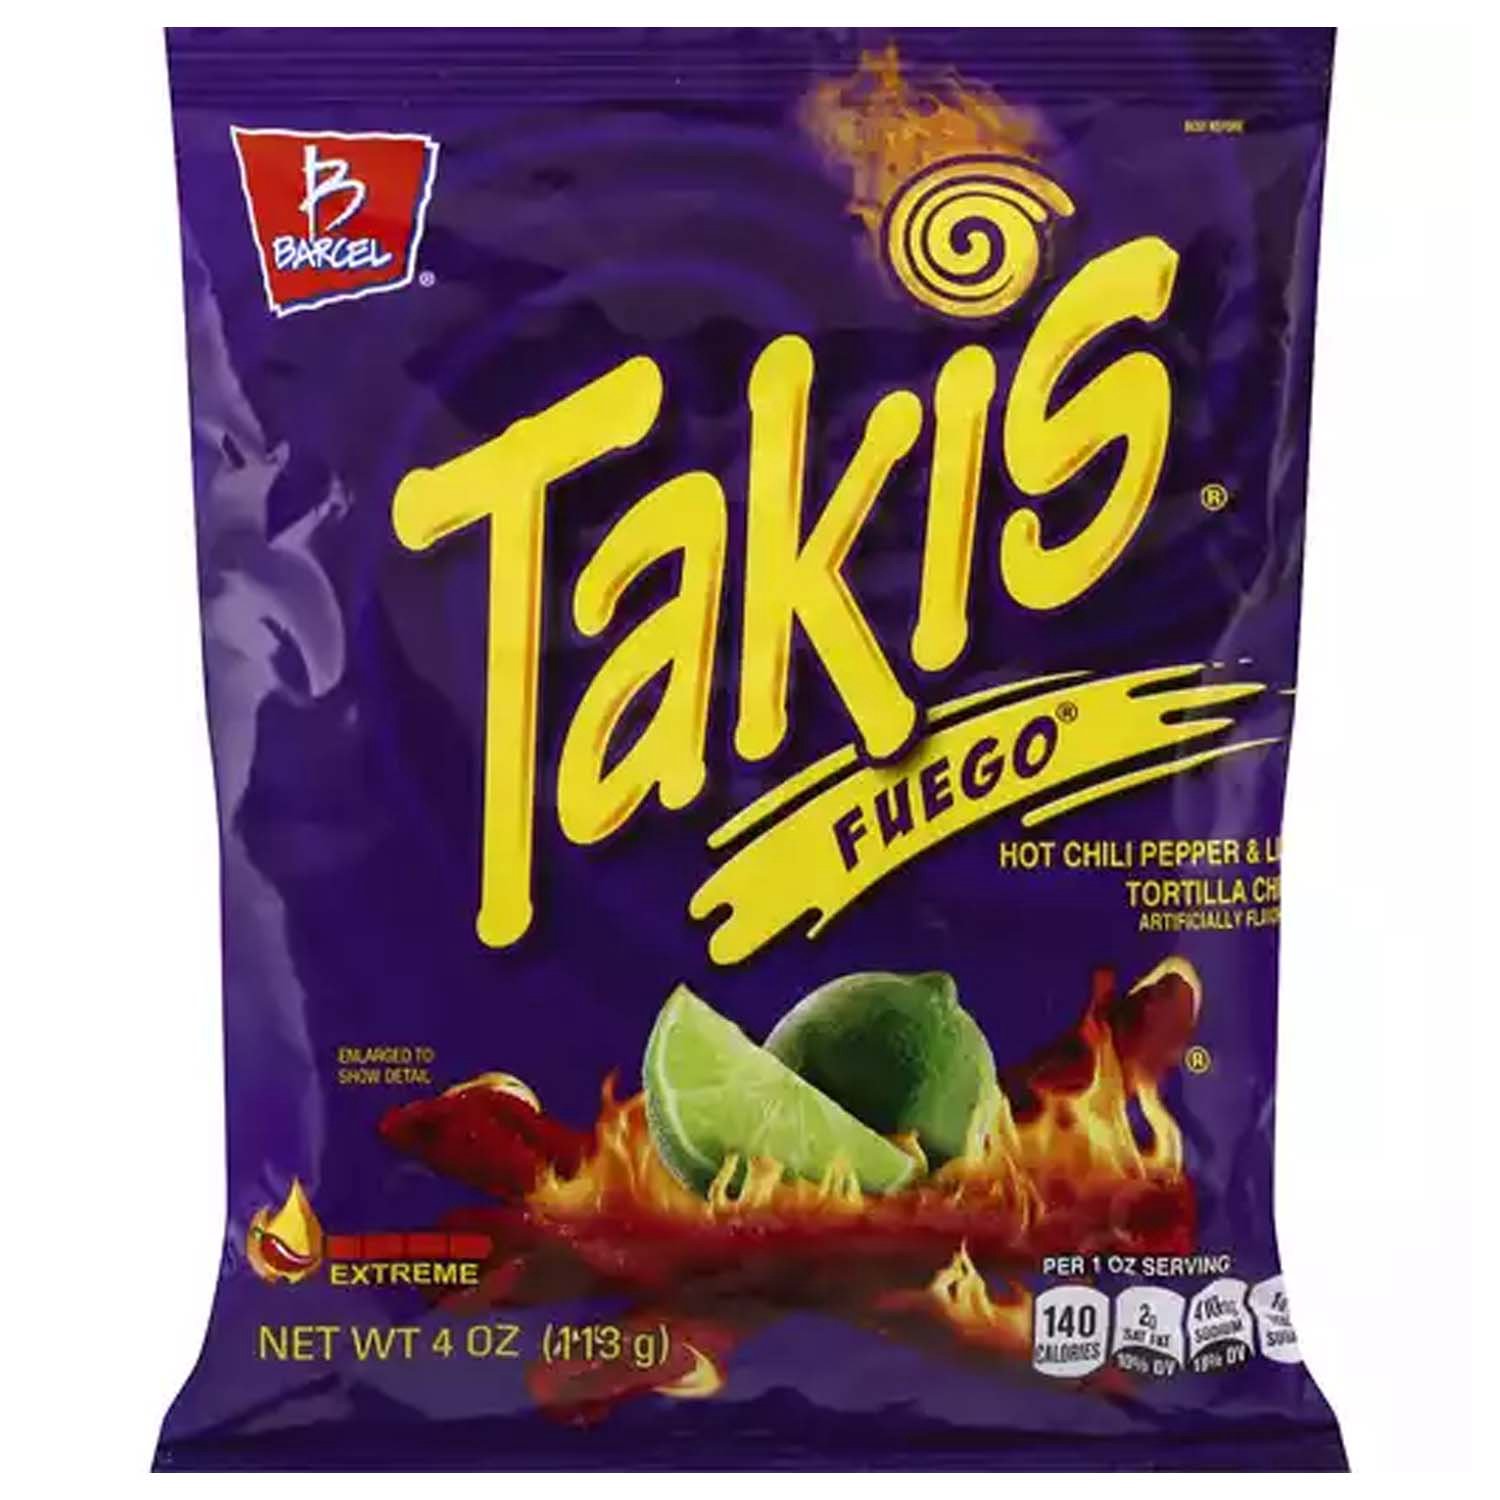 Takis Fuego Rolled Tortilla Chips - Hot Chili Pepper & Lime, 9.9 oz